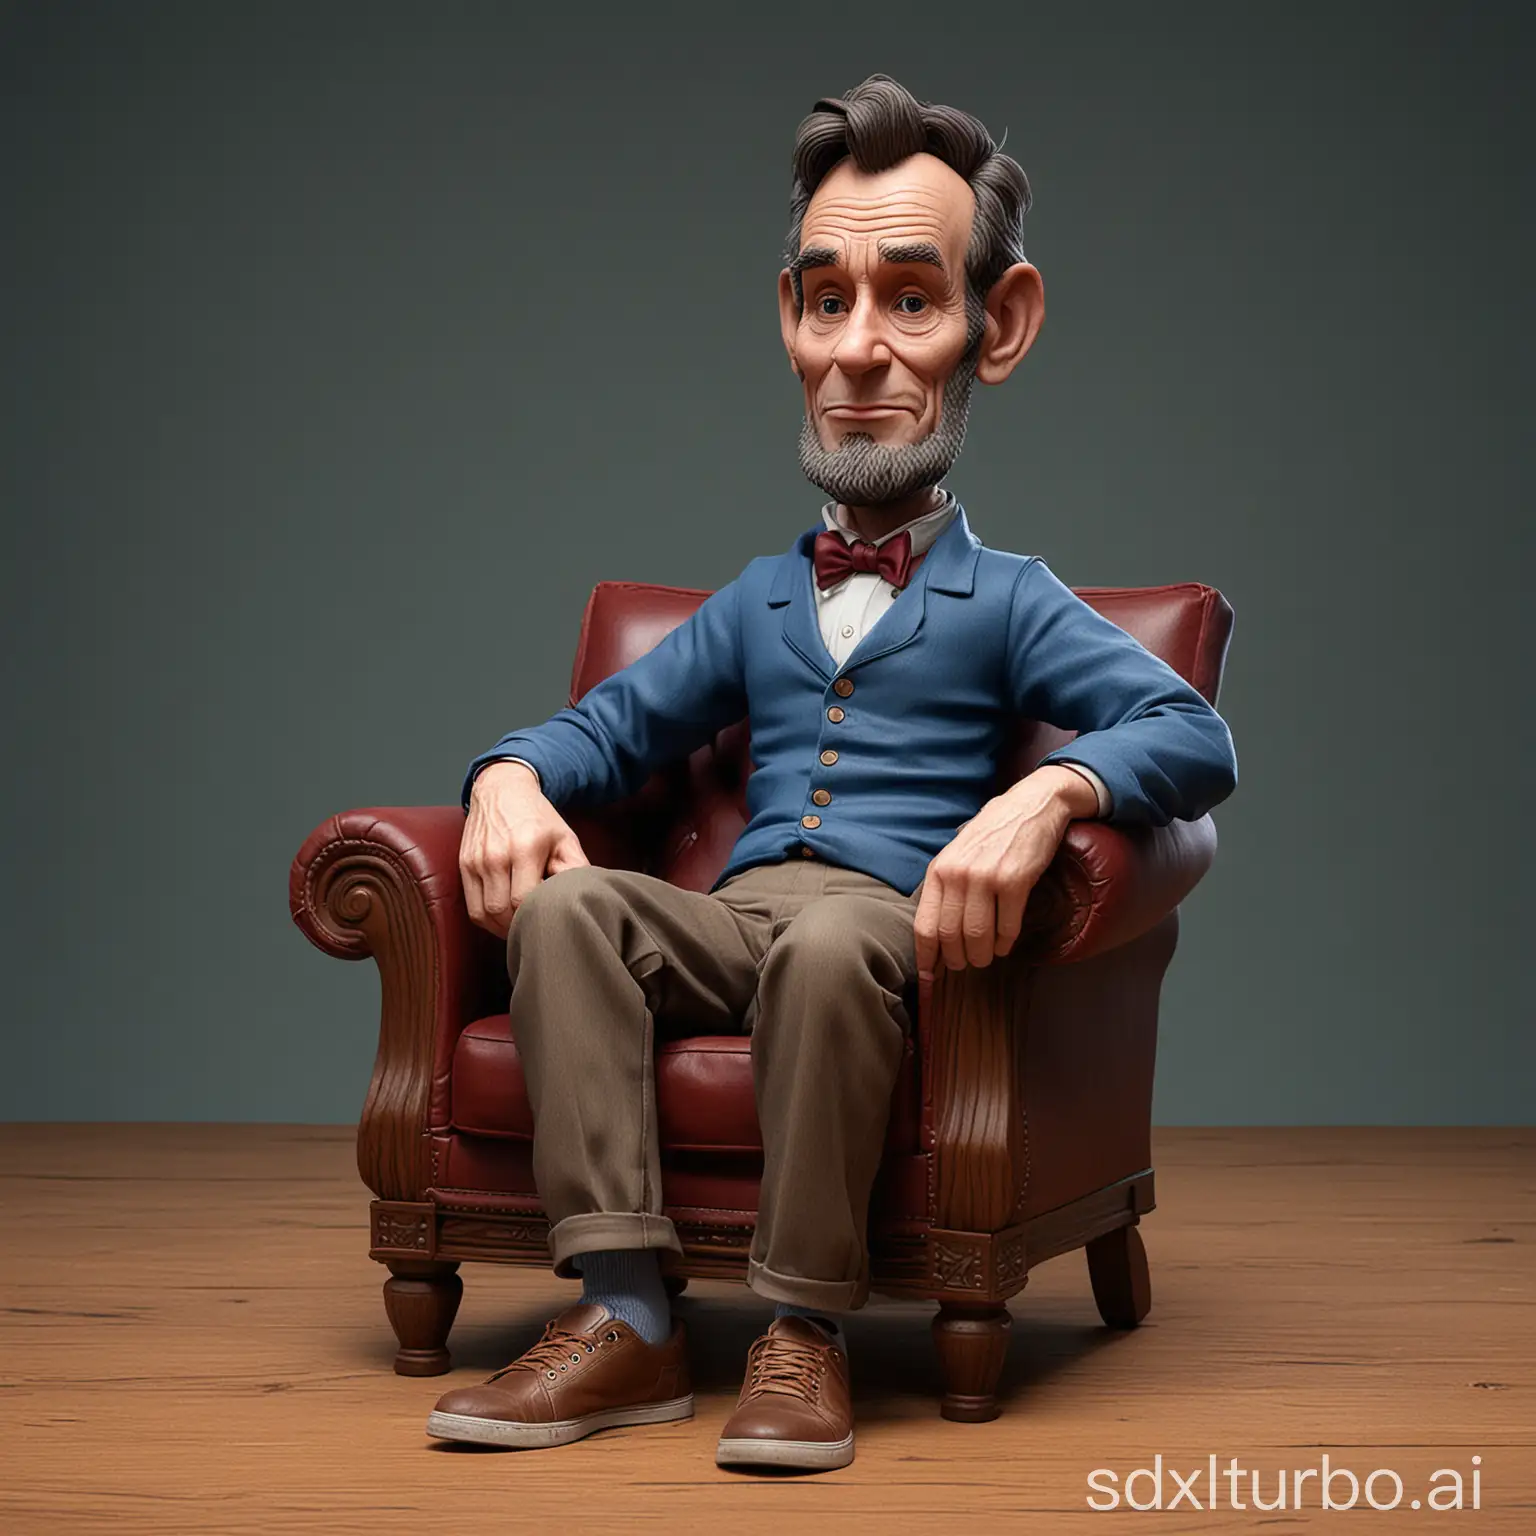 Create a realistic full body 3D Disney Pixar caricature with a large head. Abraham Lincoln, is sitting relaxed in a sofa chair with a dark red wing back, the texture of the wood is clearly visible. Wearing a blue t-shirt, wearing brown trousers. Wearing white sneakers. Right hand holding the camera, left hand placed on the edge of the chair. The background should contrast with the color of the chairs and clothes, thereby enhancing the overall composition of the picture. Use soft photographic lighting, dramatic overhead lighting, very high image quality, clear character details, UHD, 16k.